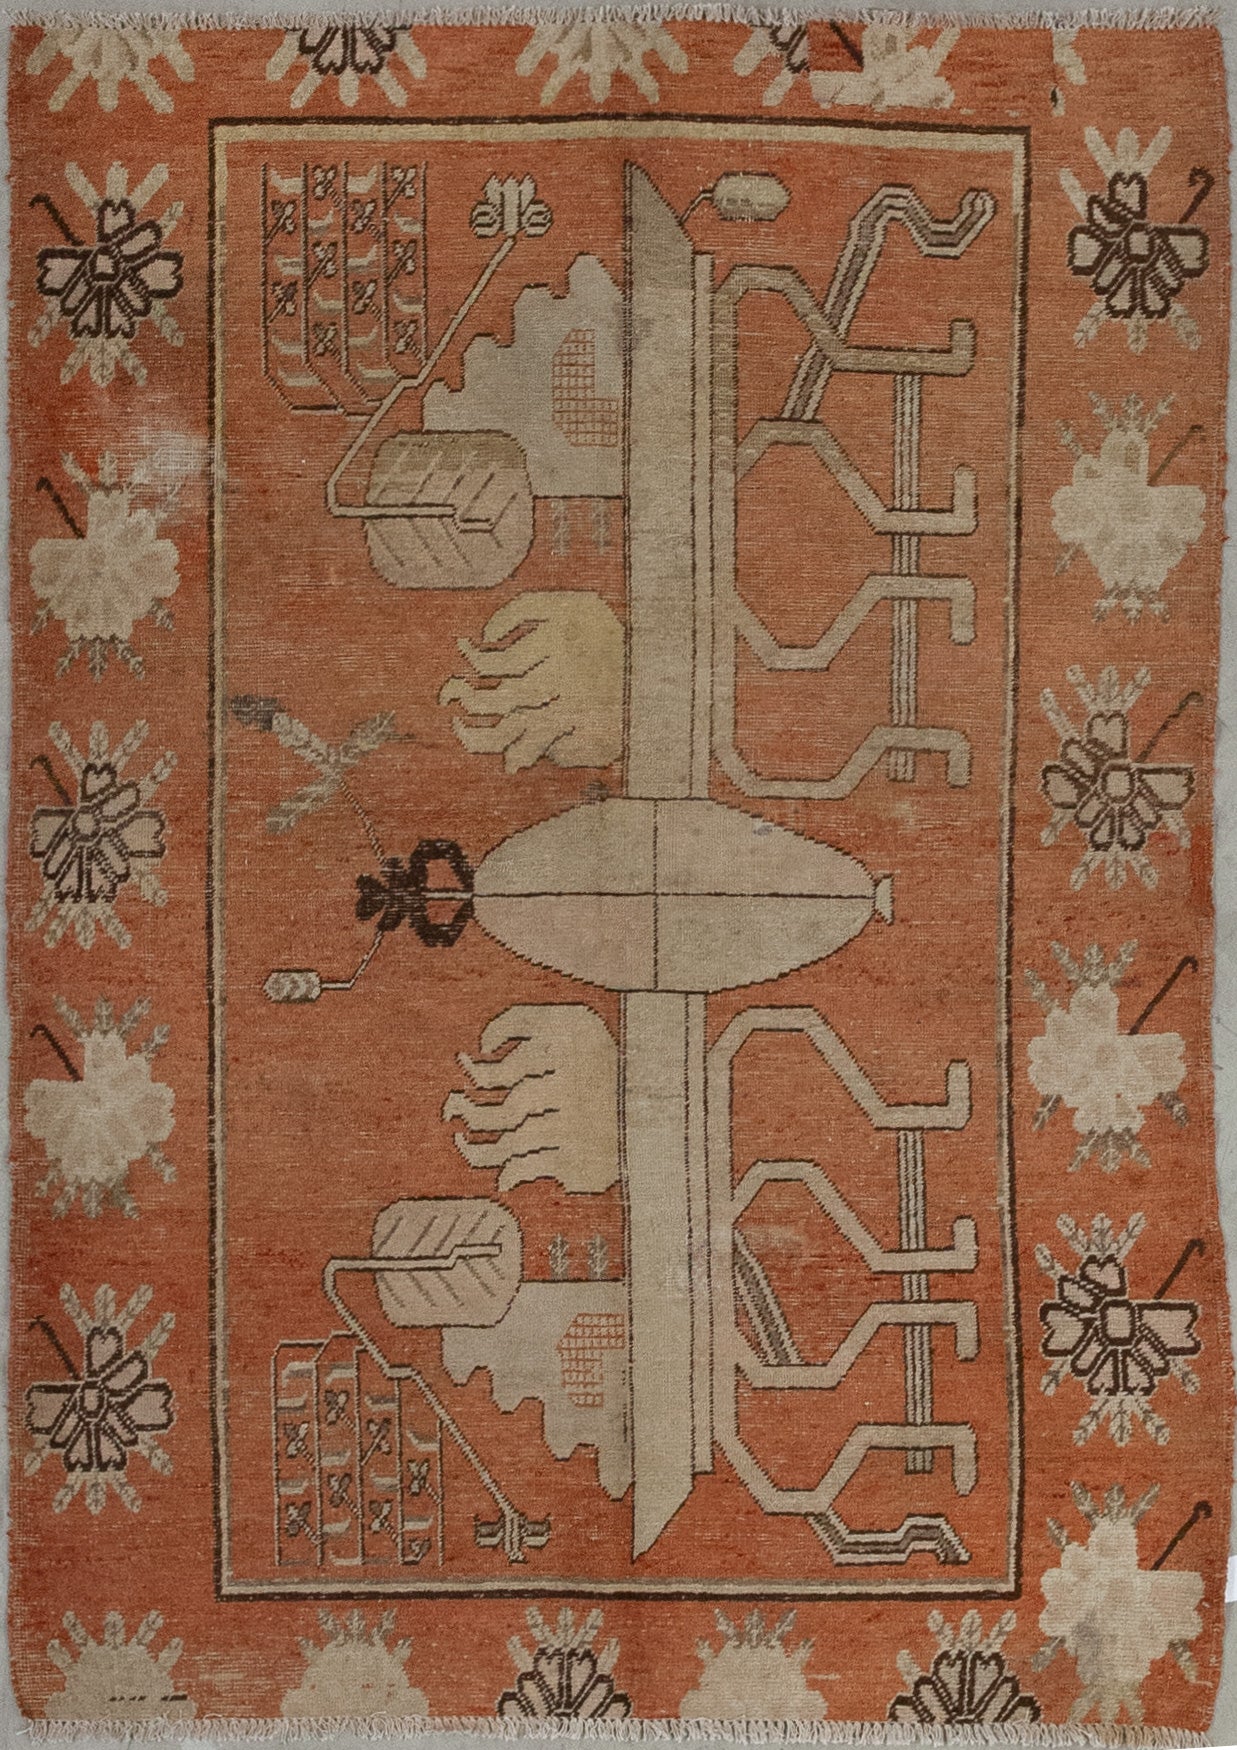 This minimalistic rug comes with an optimistic color scheme which has orange for the entire background, beige for the central artwork, and brown for the outline. The design features an 8-legged table that holds two flame shapes on top.